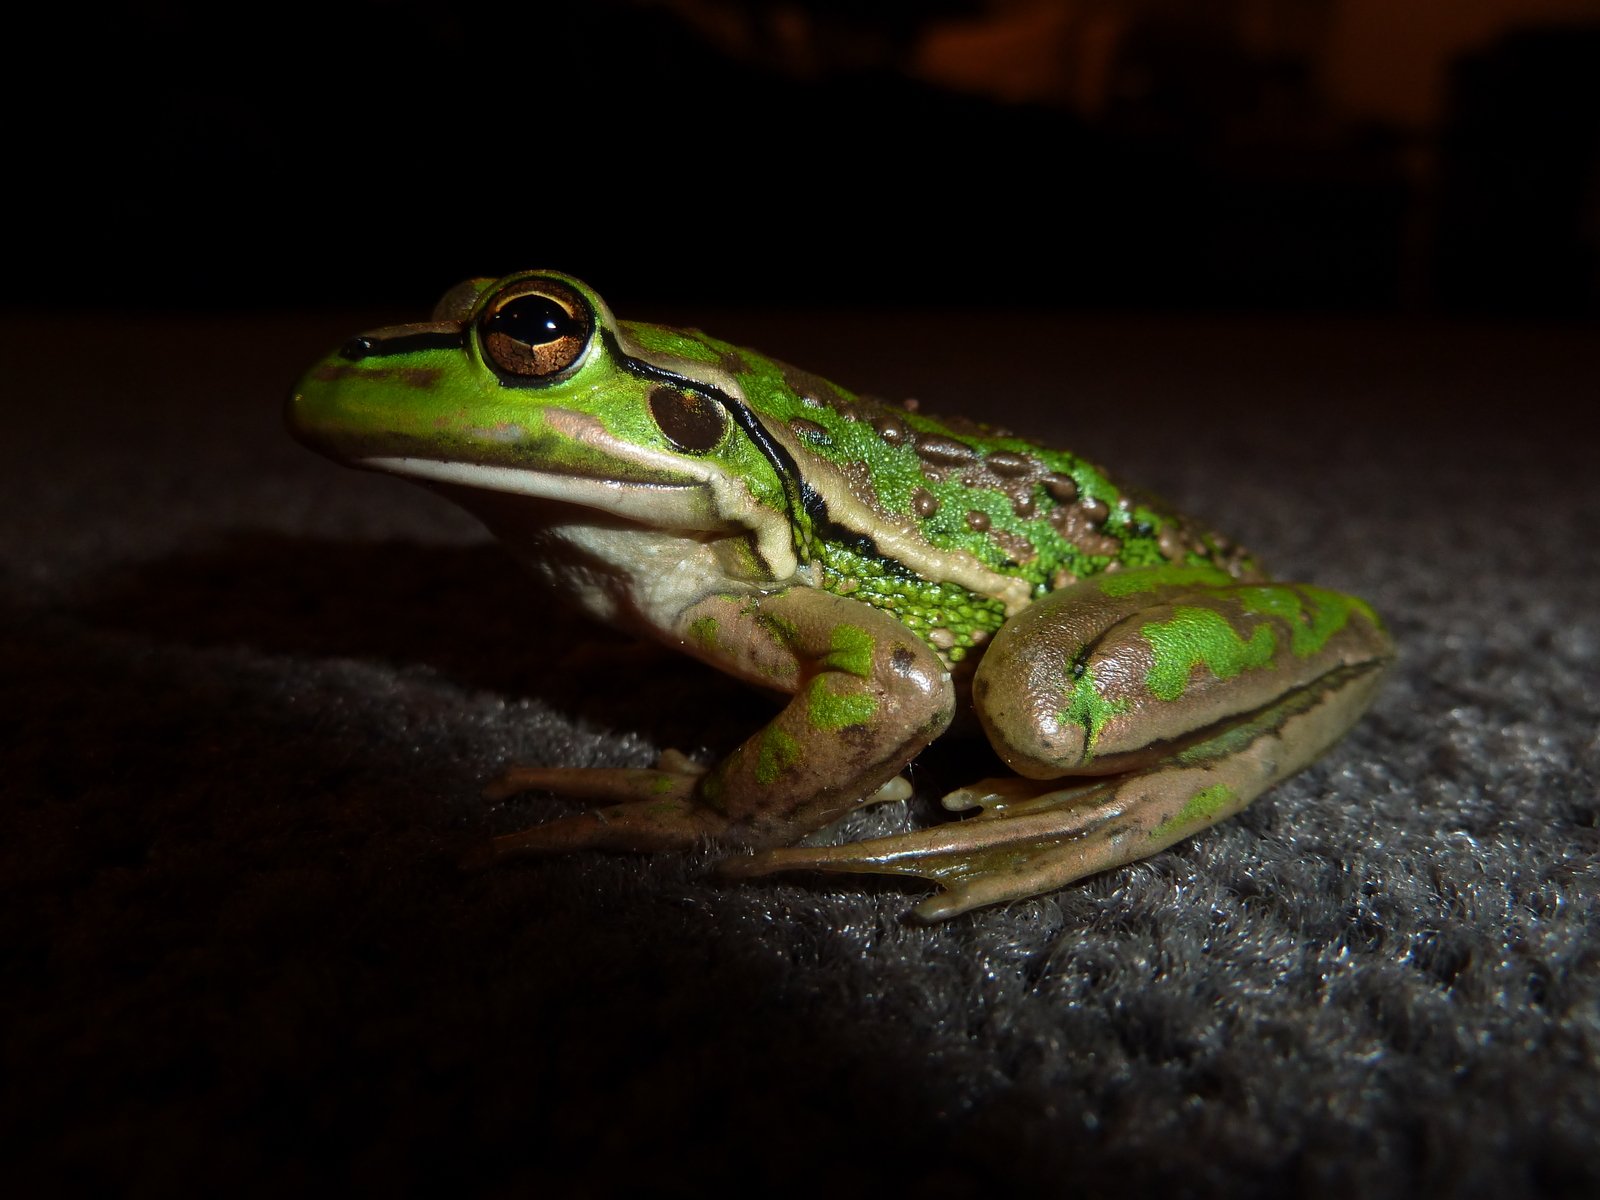 a close up of a green frog on the ground